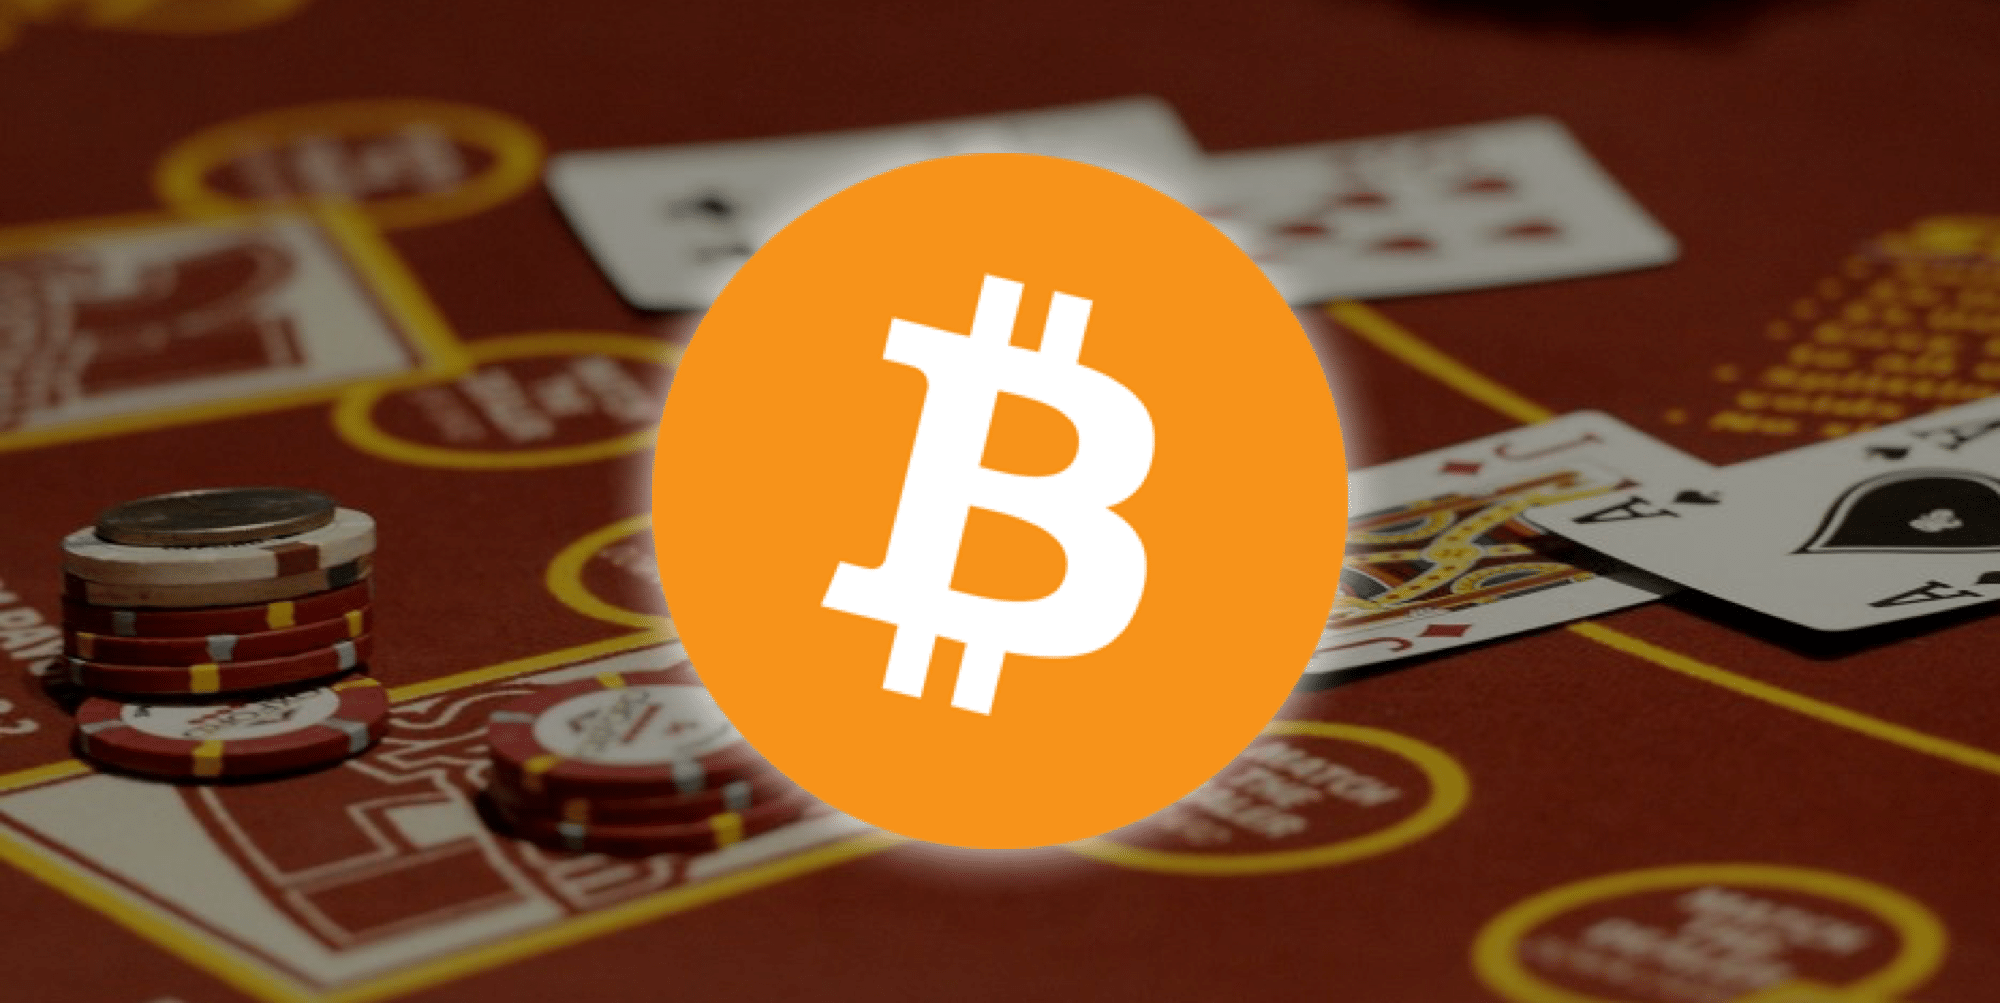 The #1 bitcoins gambling Mistake, Plus 7 More Lessons